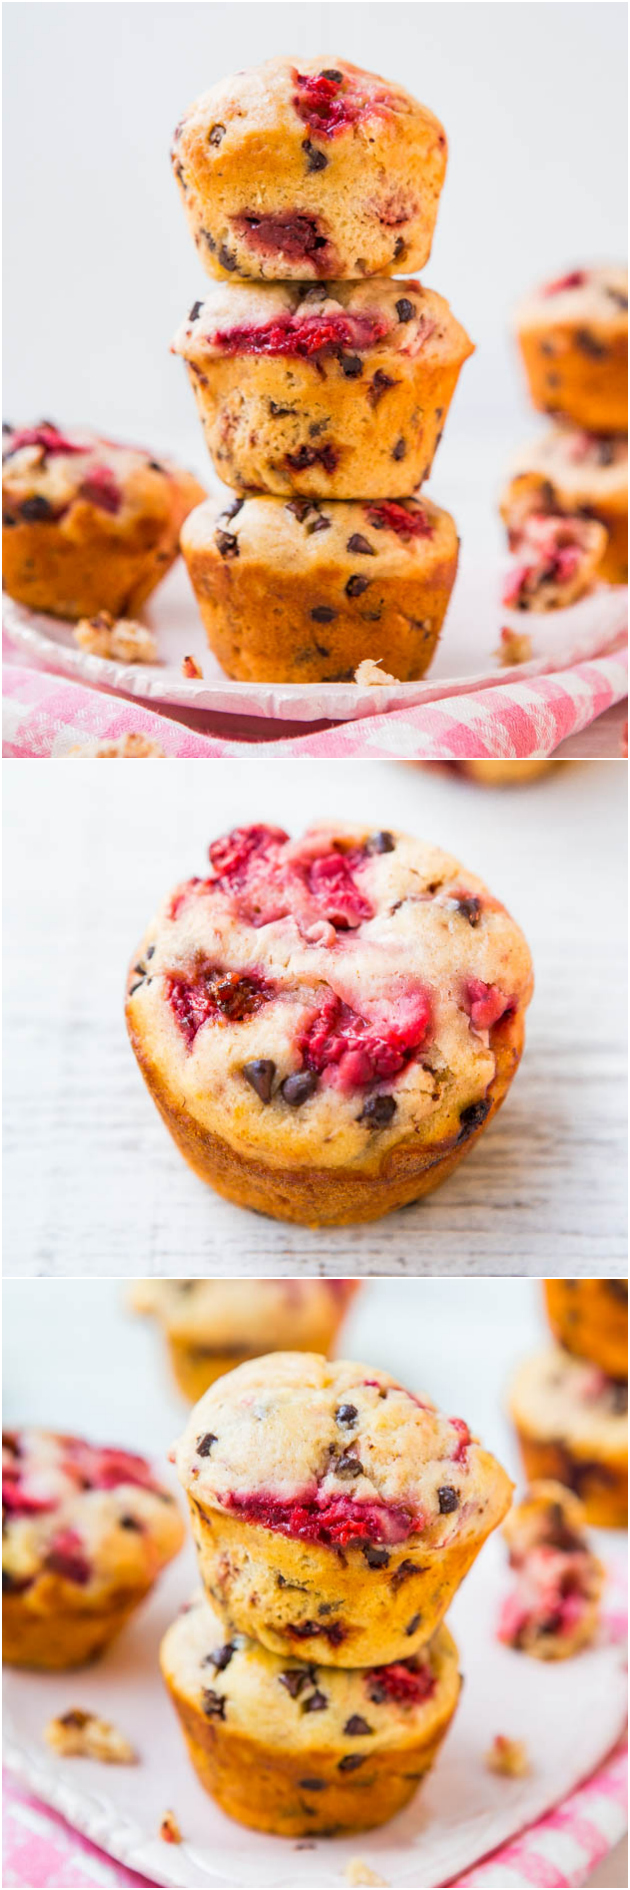 Strawberry Chocolate Chip Muffins - Soft, moist, easy muffins that are bursting with juicy berries! Great for breakfast or snacks! 